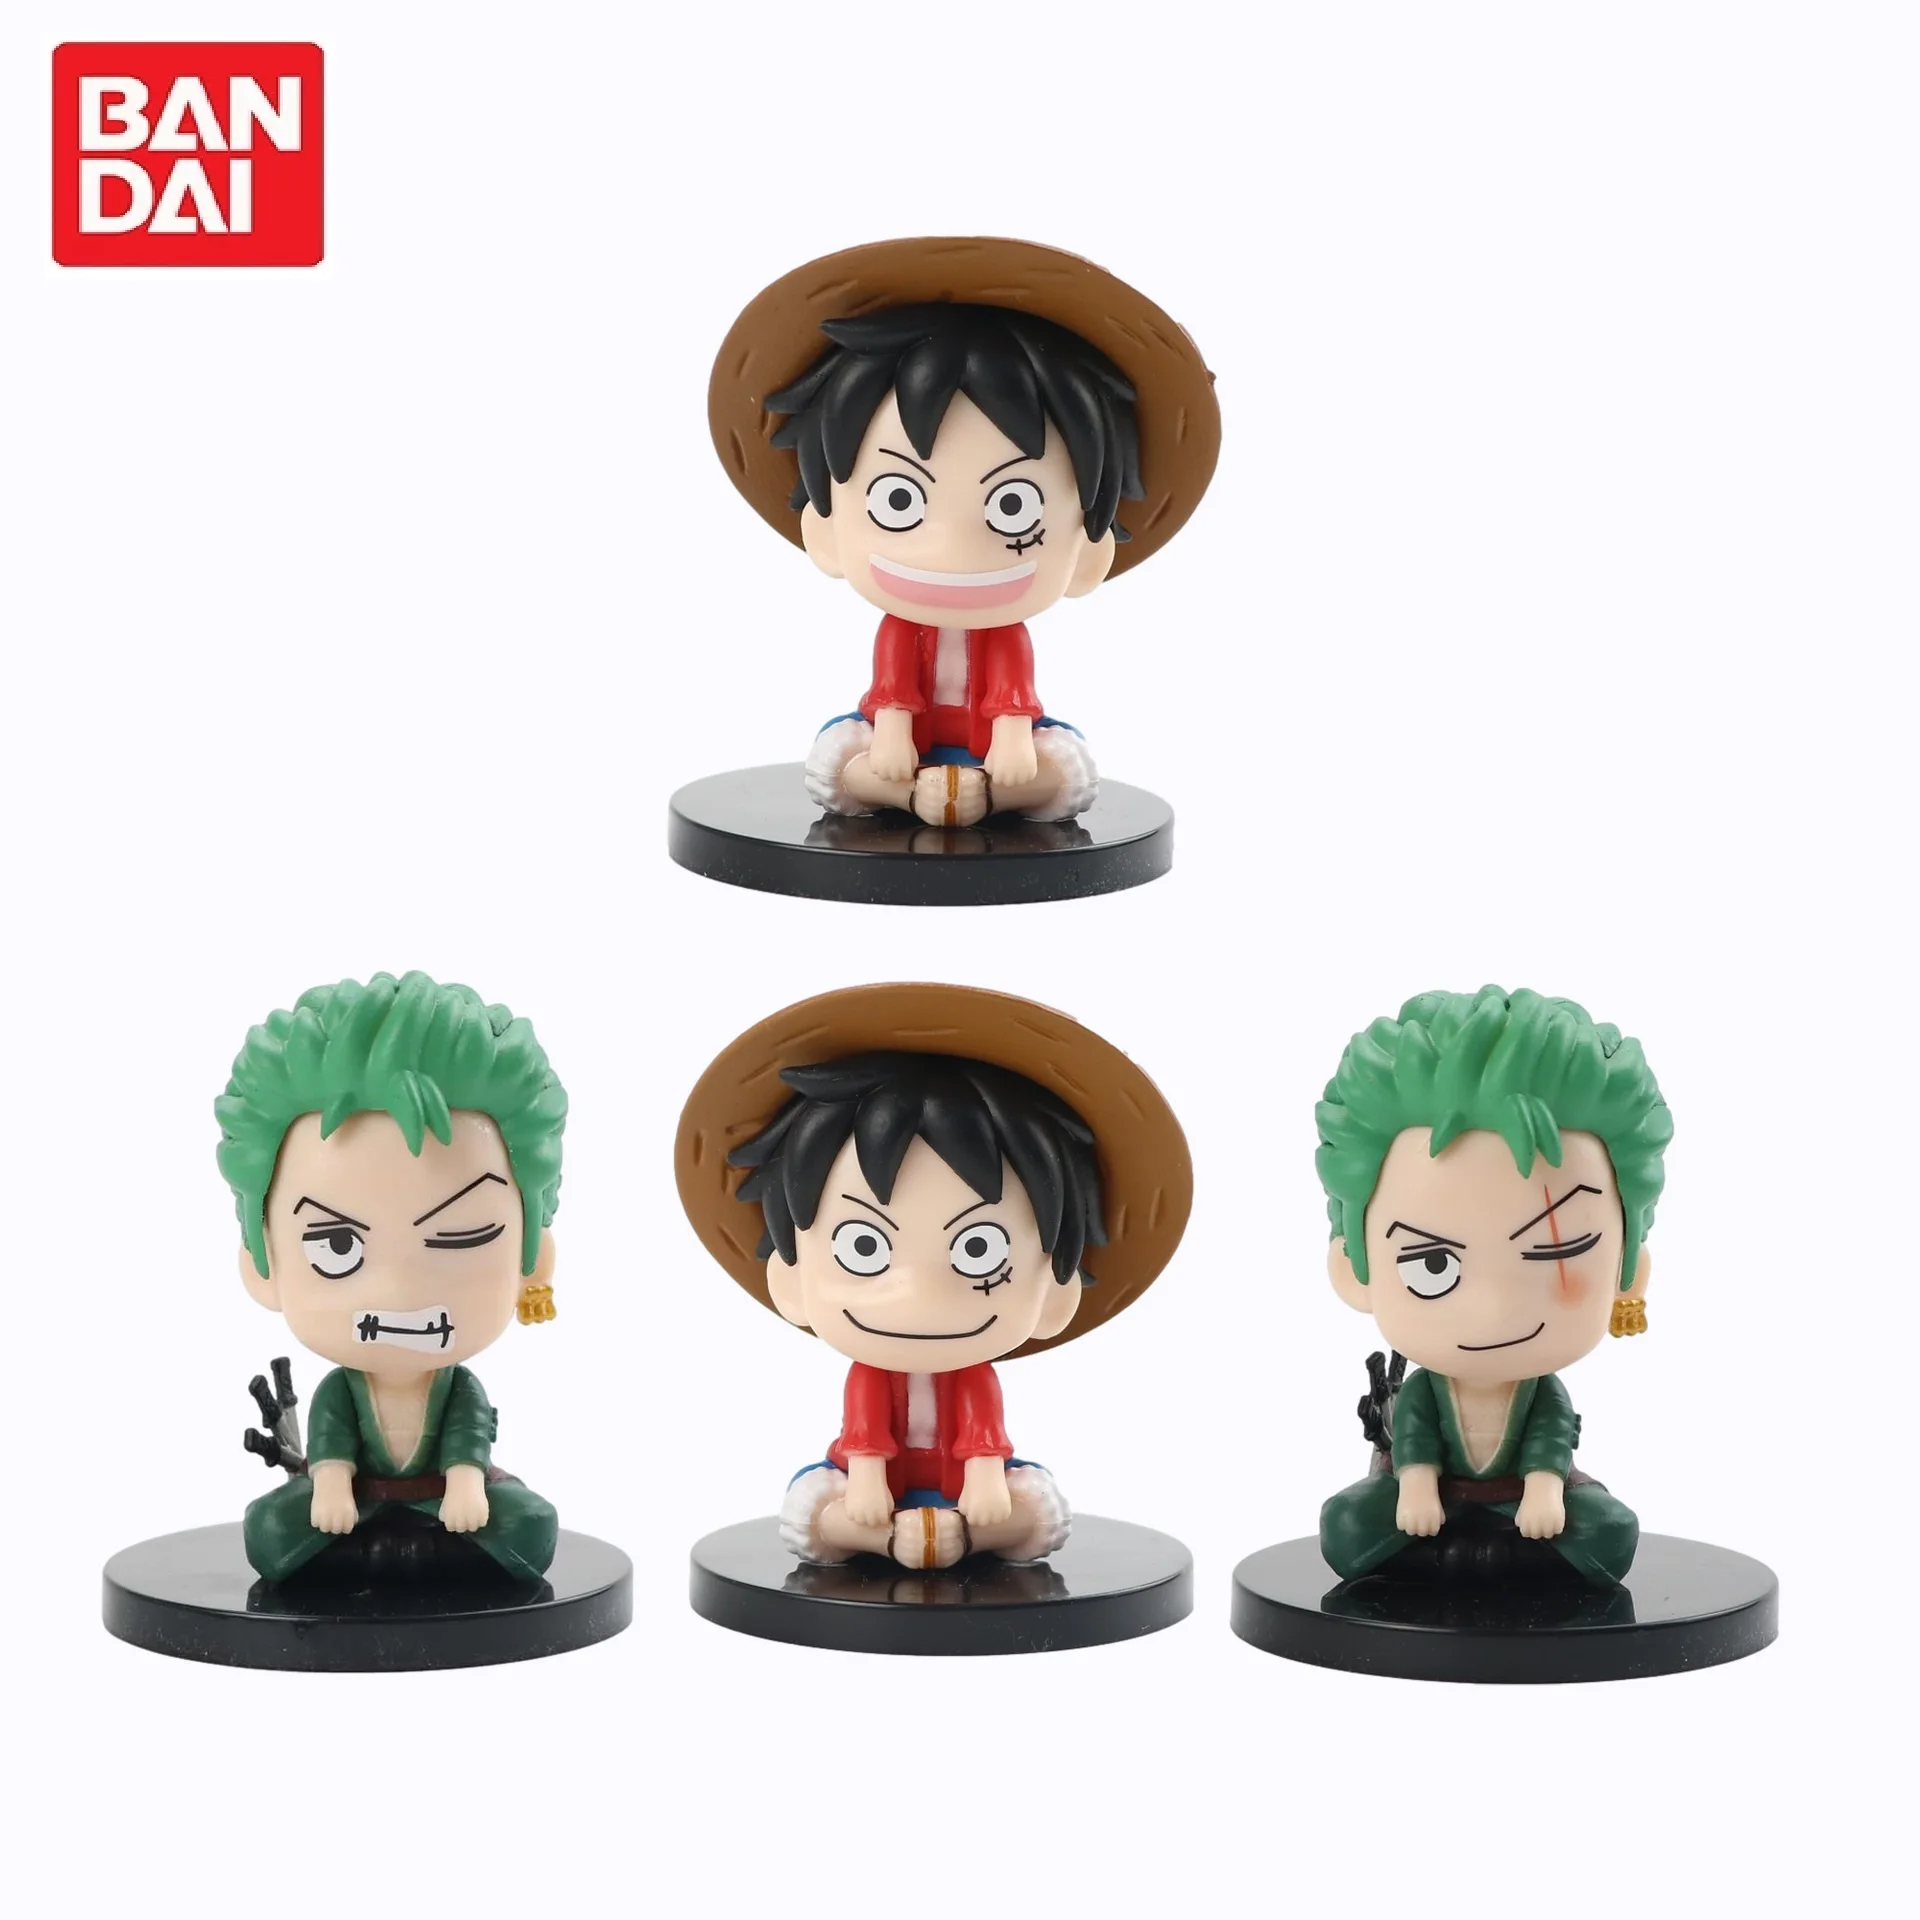 

7CM Anime One Piece Figure Luffy Zoro Q Version Action Figure PVC Cute Collectible Model Decor Doll Children Toys Gift